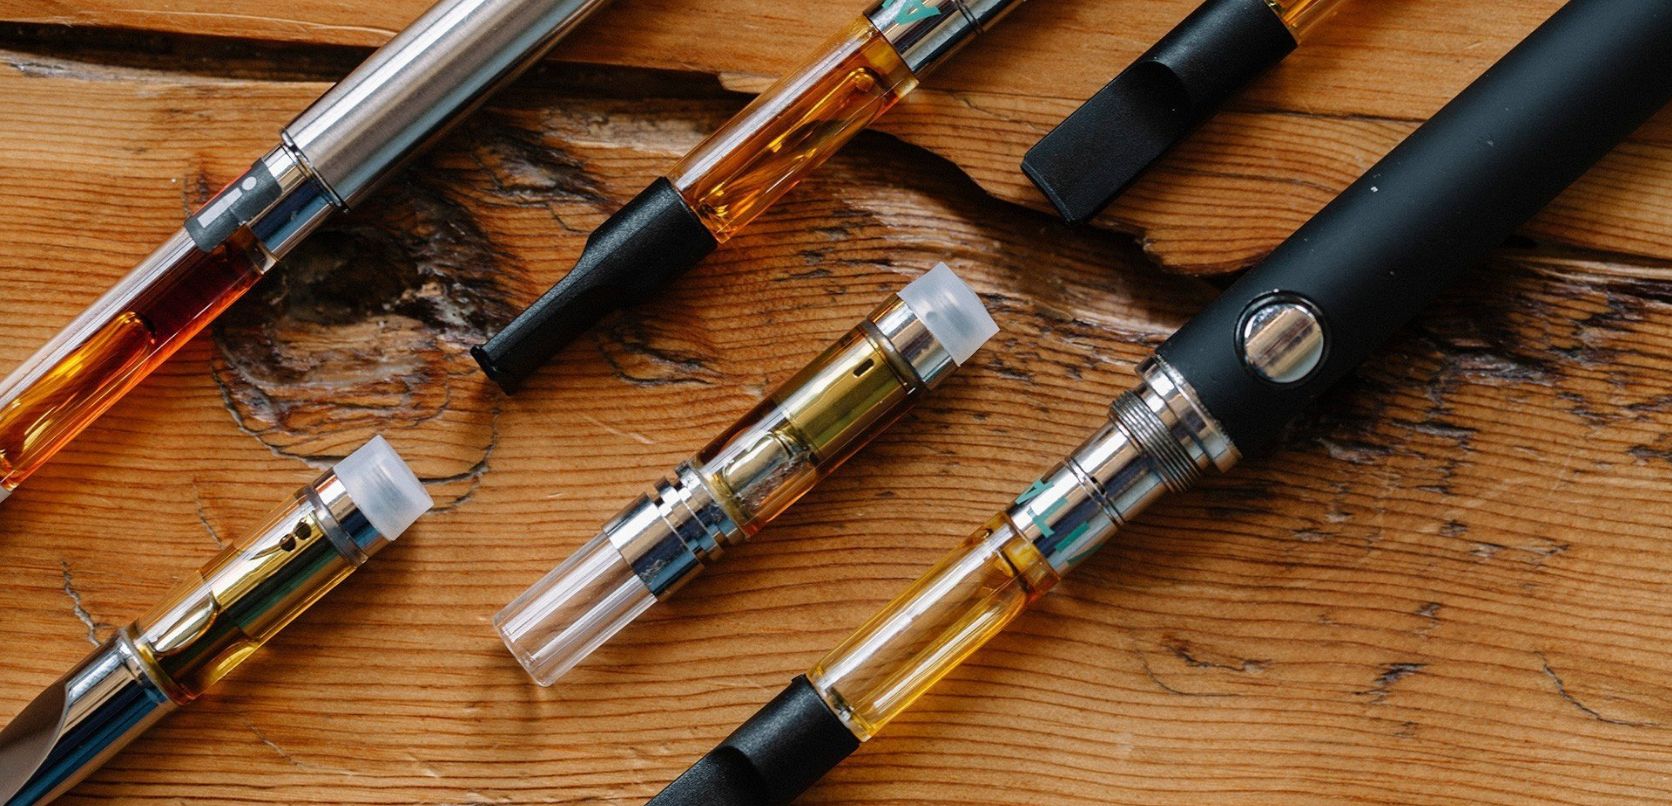 If you’d prefer quick onset of effects but dislike smoking weed, buying vape devices from your favourite online weed dispensary may be your best bet.